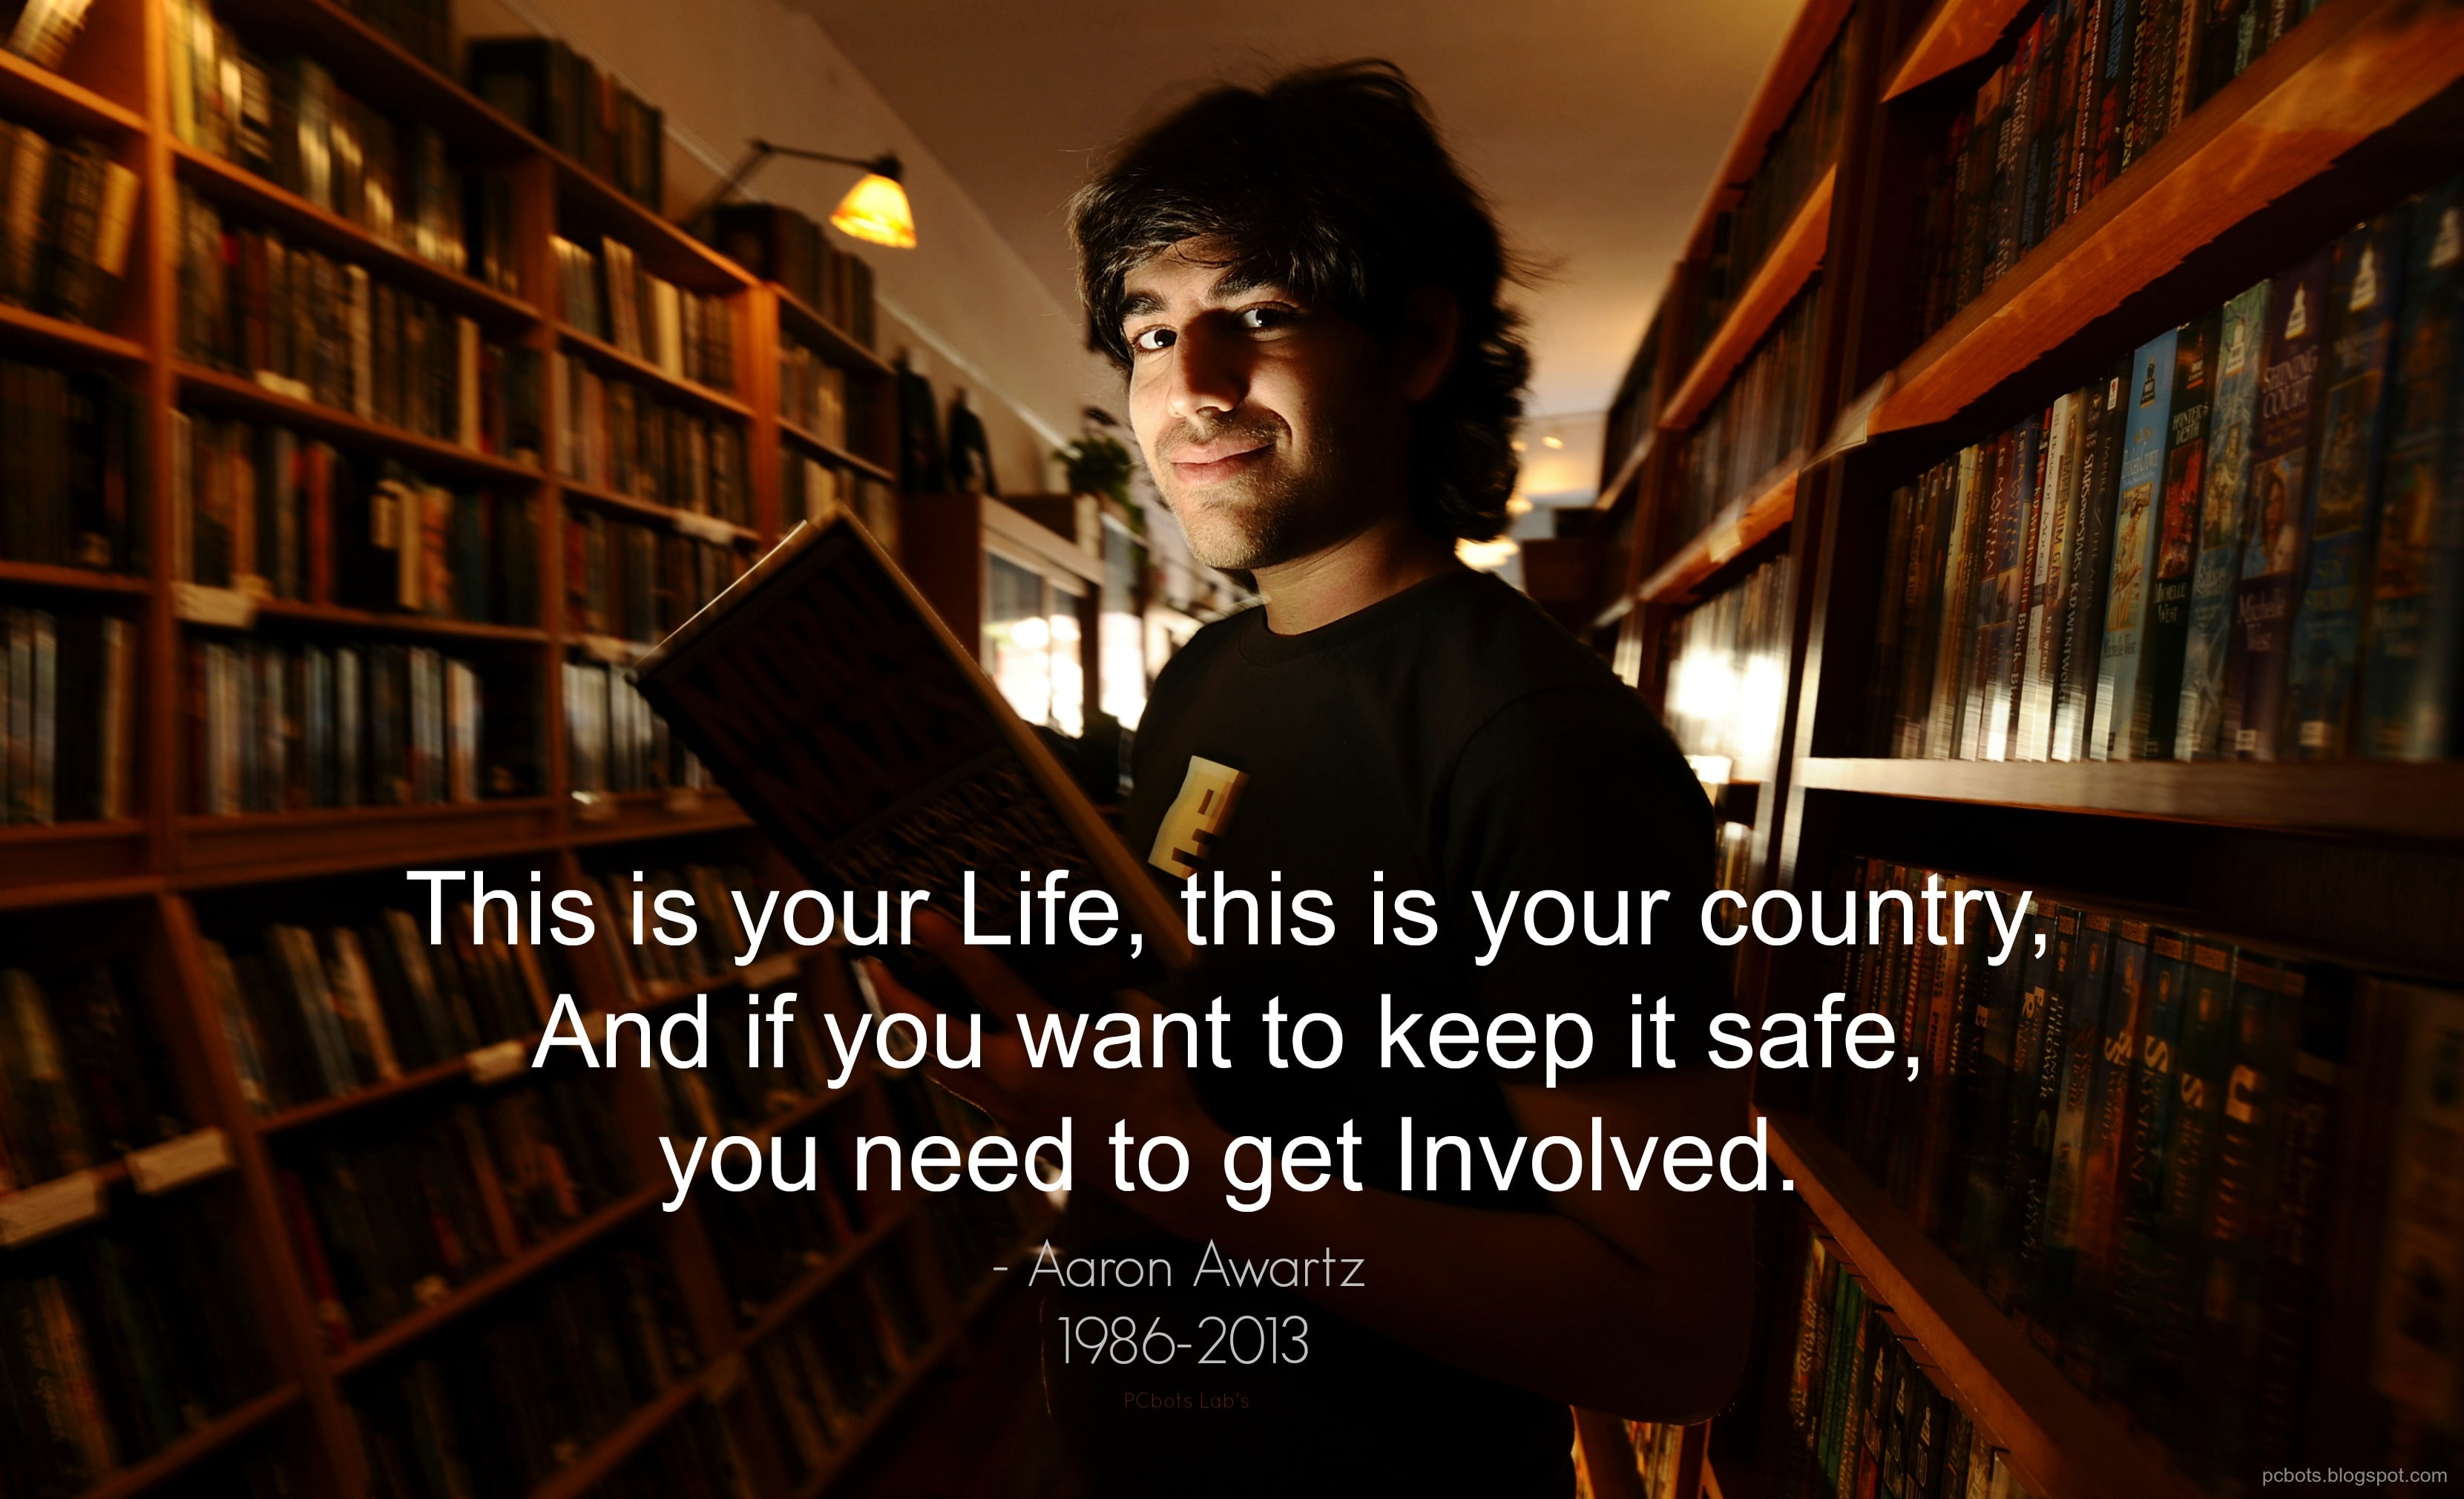 USA, Hacker, anonymous, Geek, who, Aaron Swartz, By PCbots